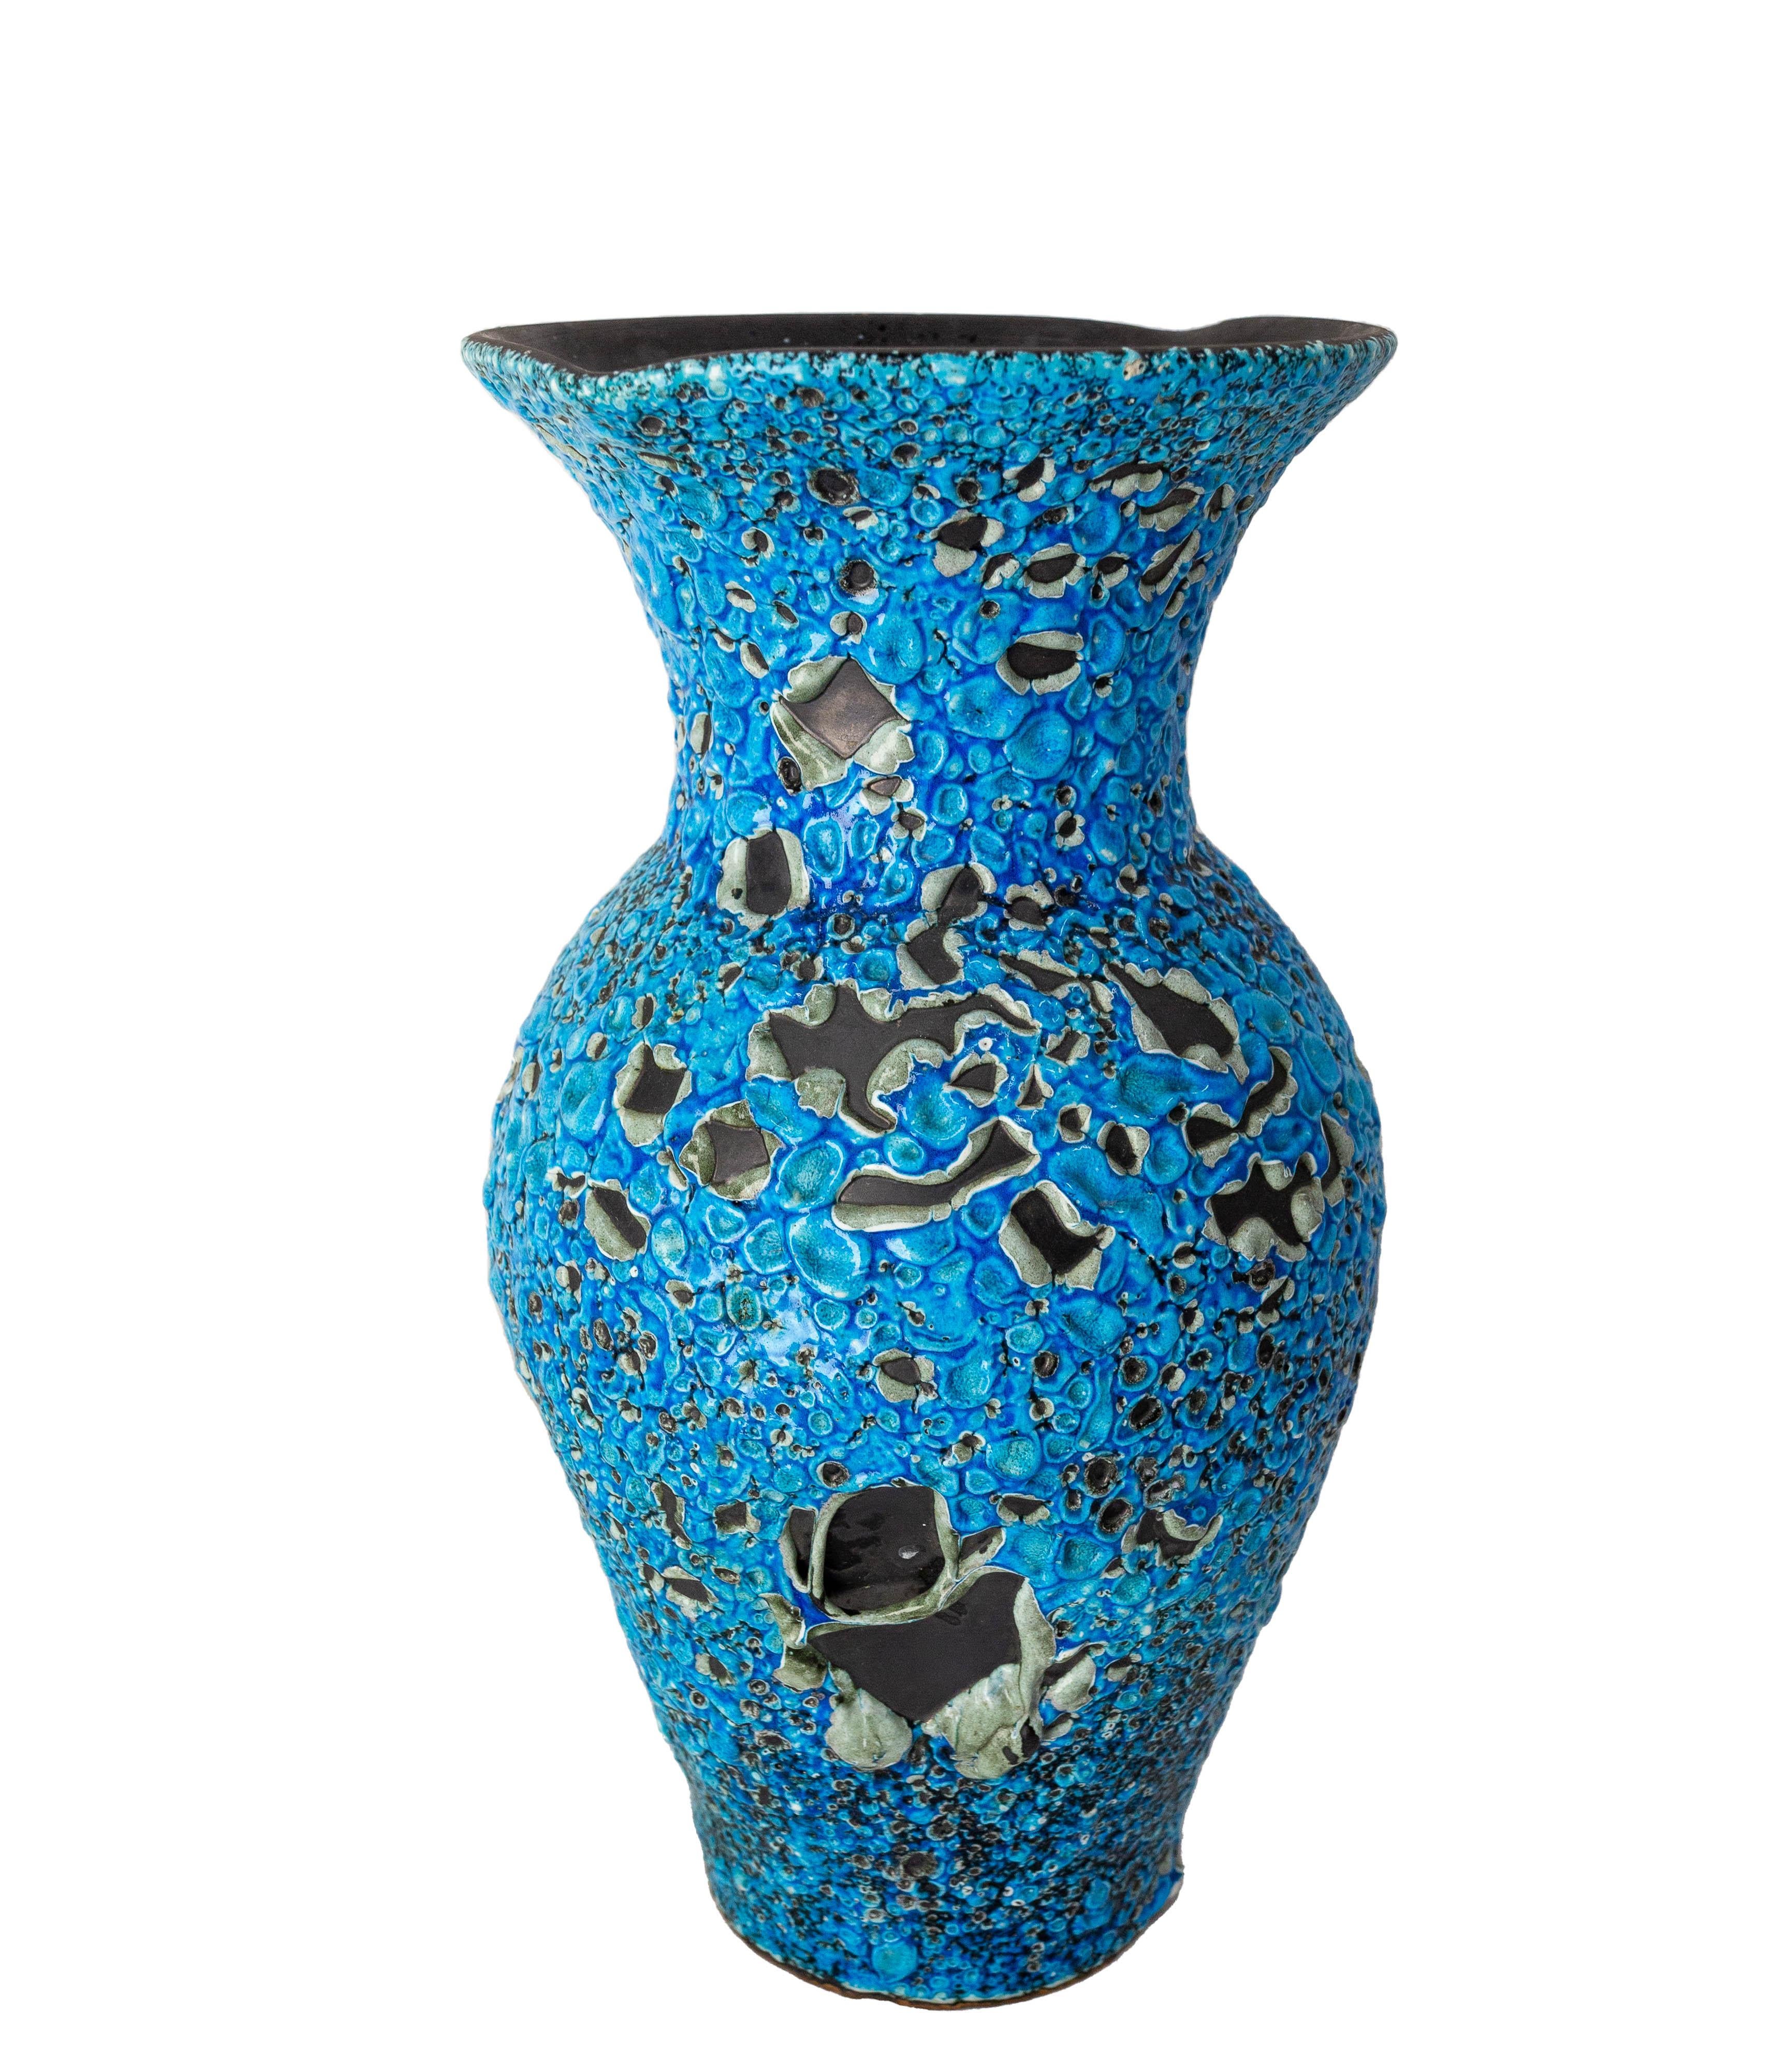 This blue vase was produced in France by Charles Cart.
He called it Cyclope because of the large volcanic dimples created during the firing of the pottery which reveal the layers of white and black below the surface. Charles Cart registered the